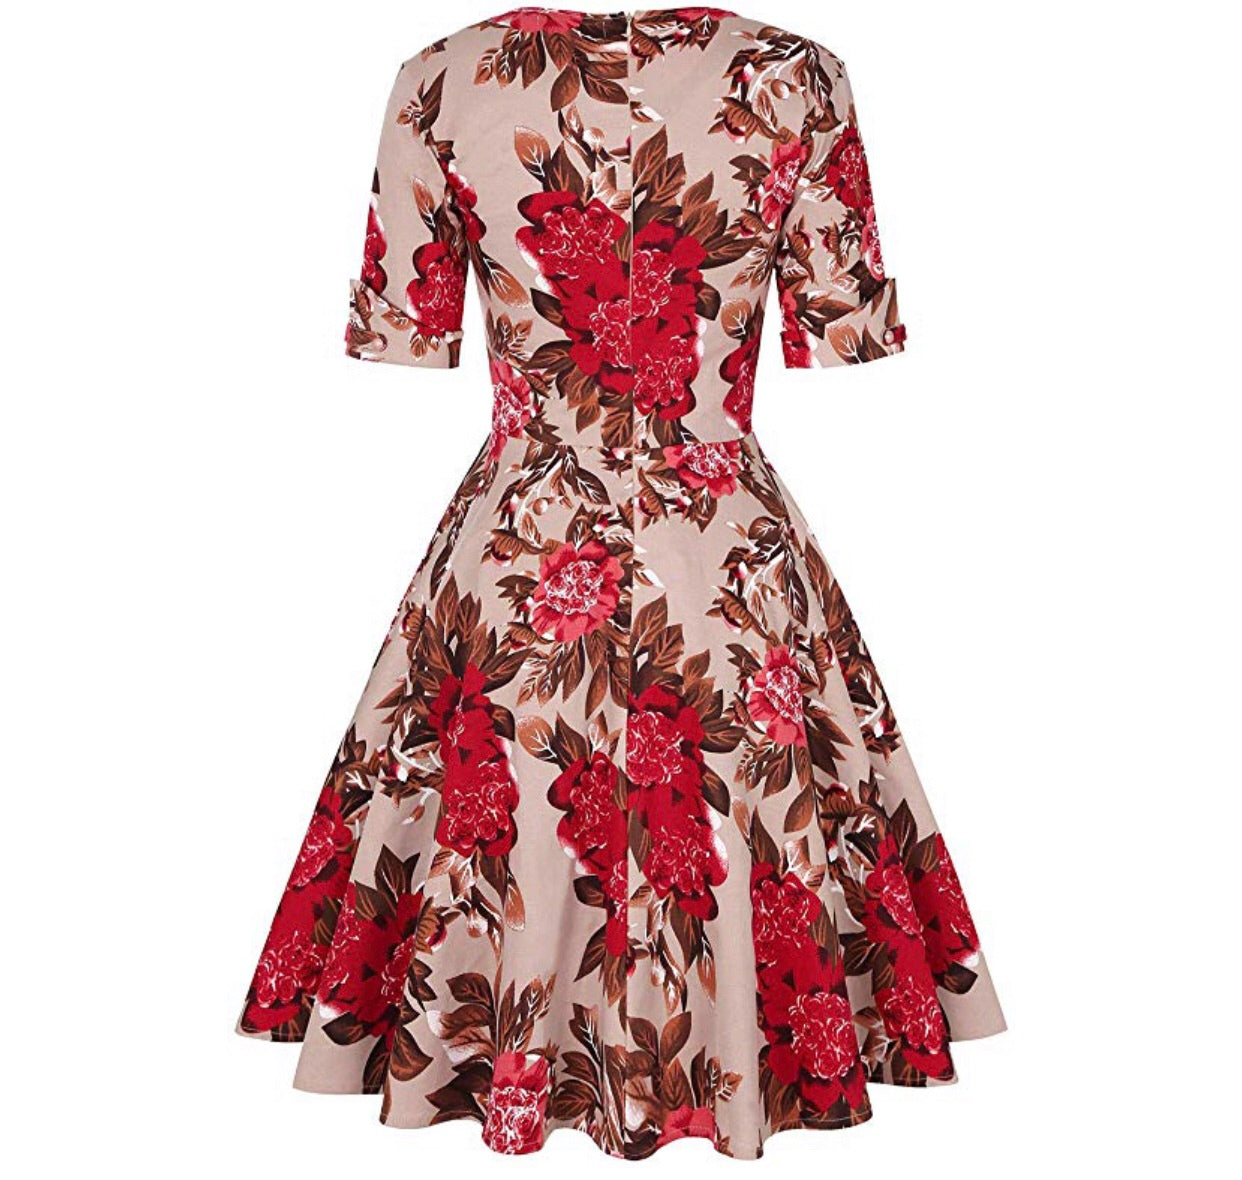 V-Neck Retro Look Swing Dress, Sizes Small - 2XLarge (US Sizes 4 - 22) Floral Red